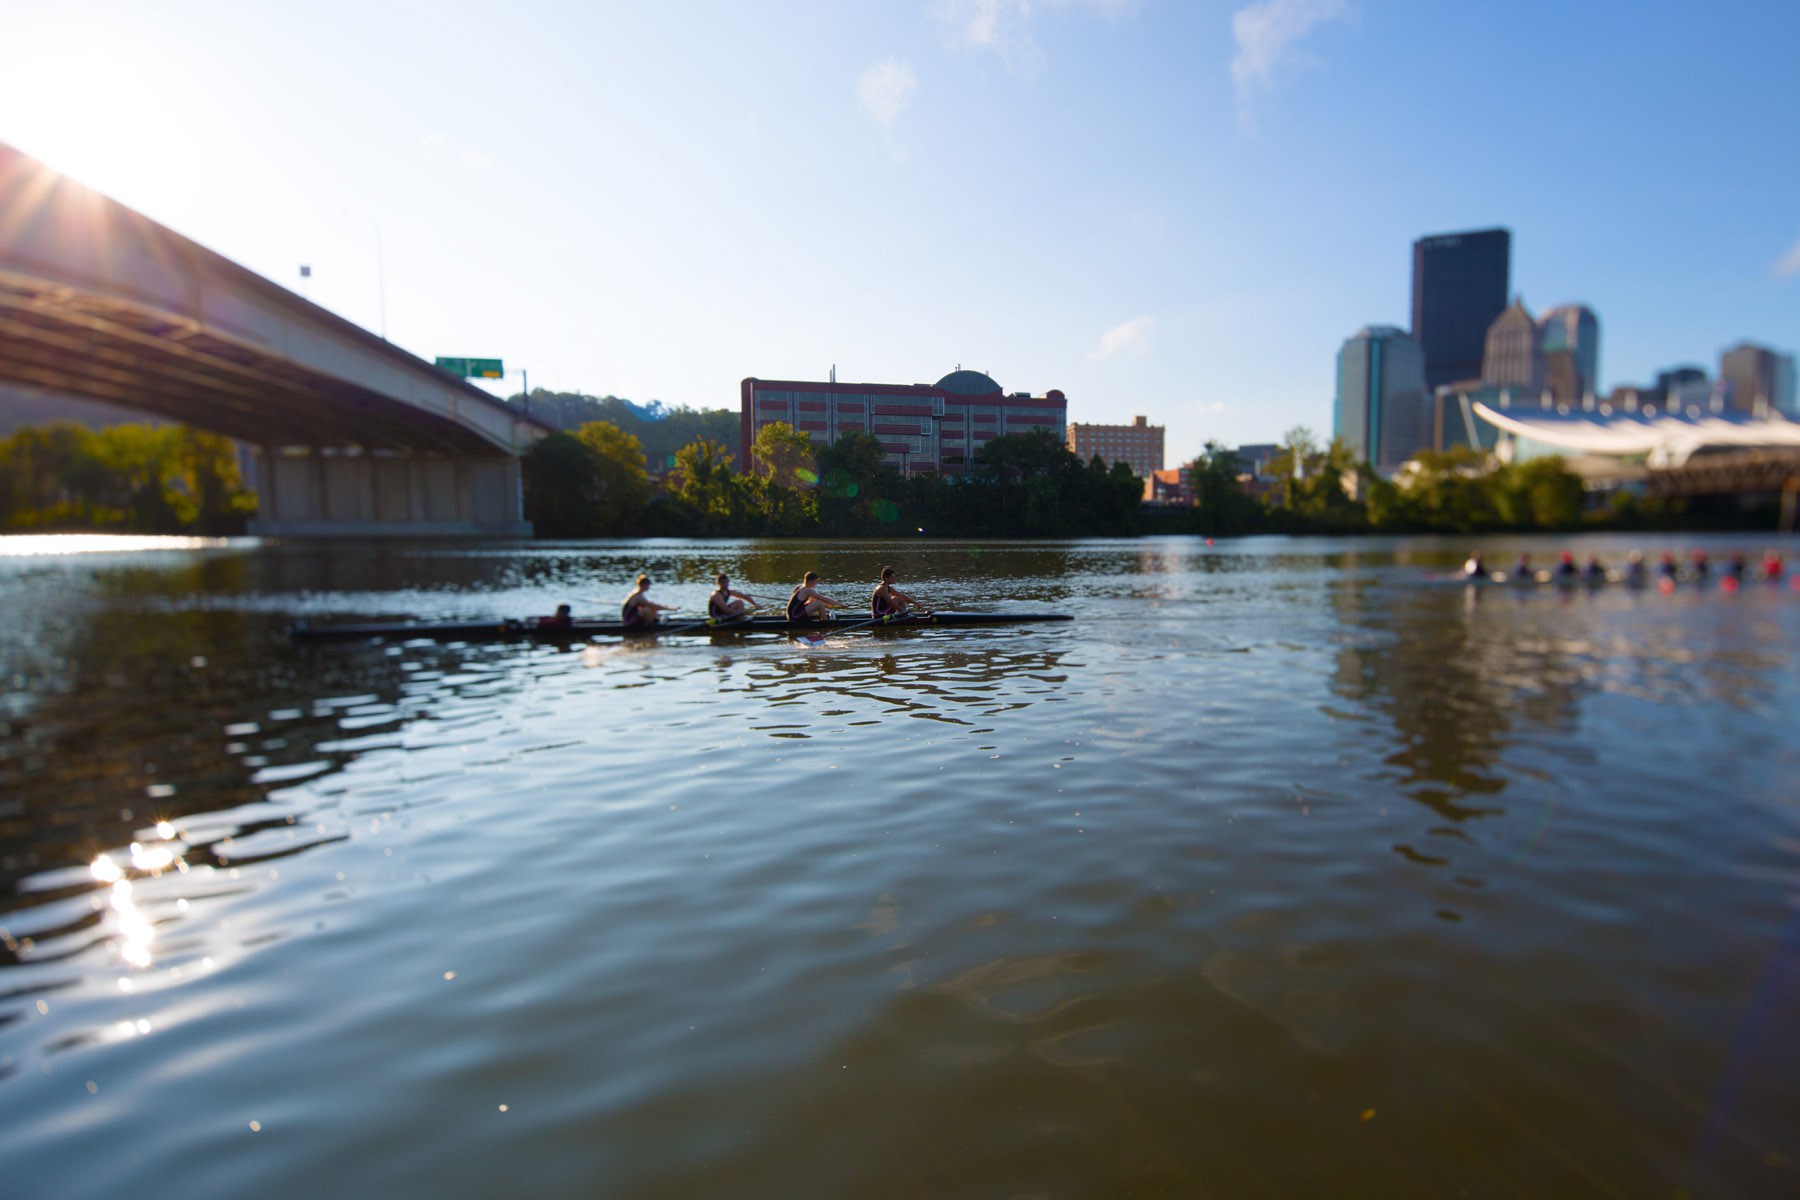 Rowers paddle by Pittsburgh's Convention Center on the Allegheny River.